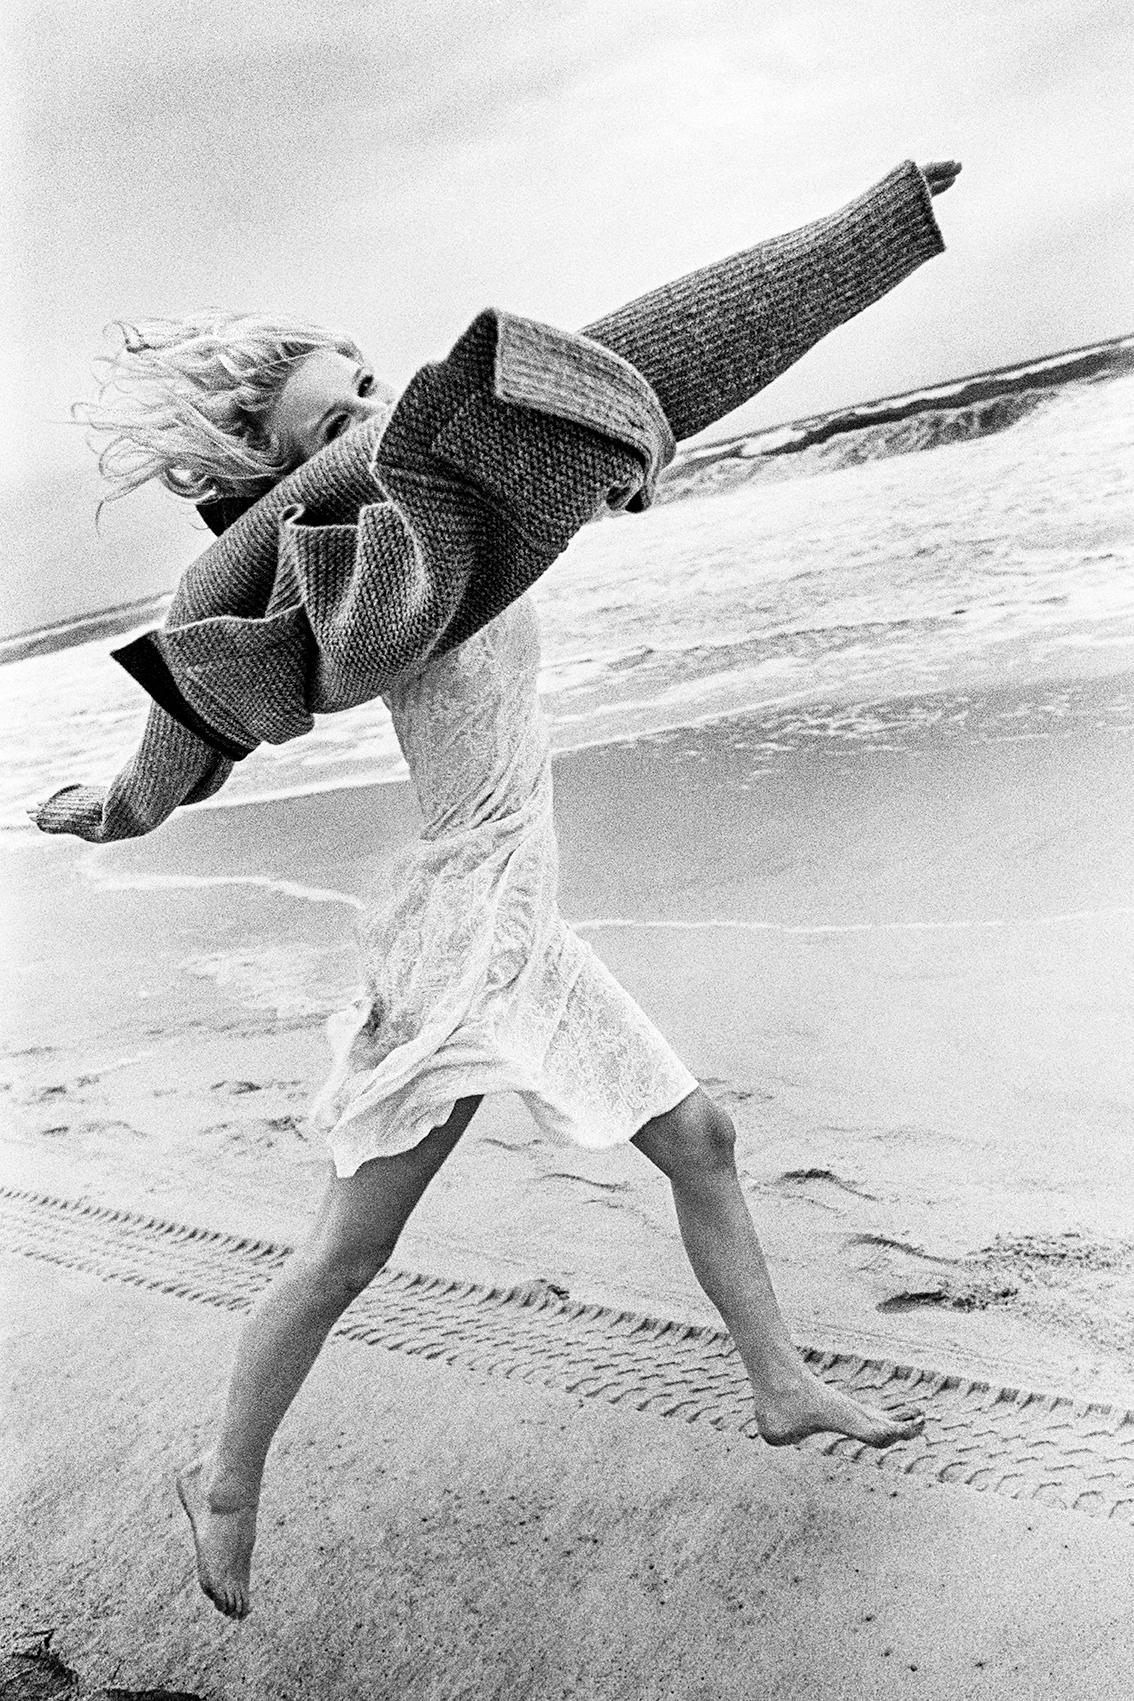 Hannes Schmid Black and White Photograph -  "In spite of everything life is not without hope.", The Hamptons, Eva Herzigová